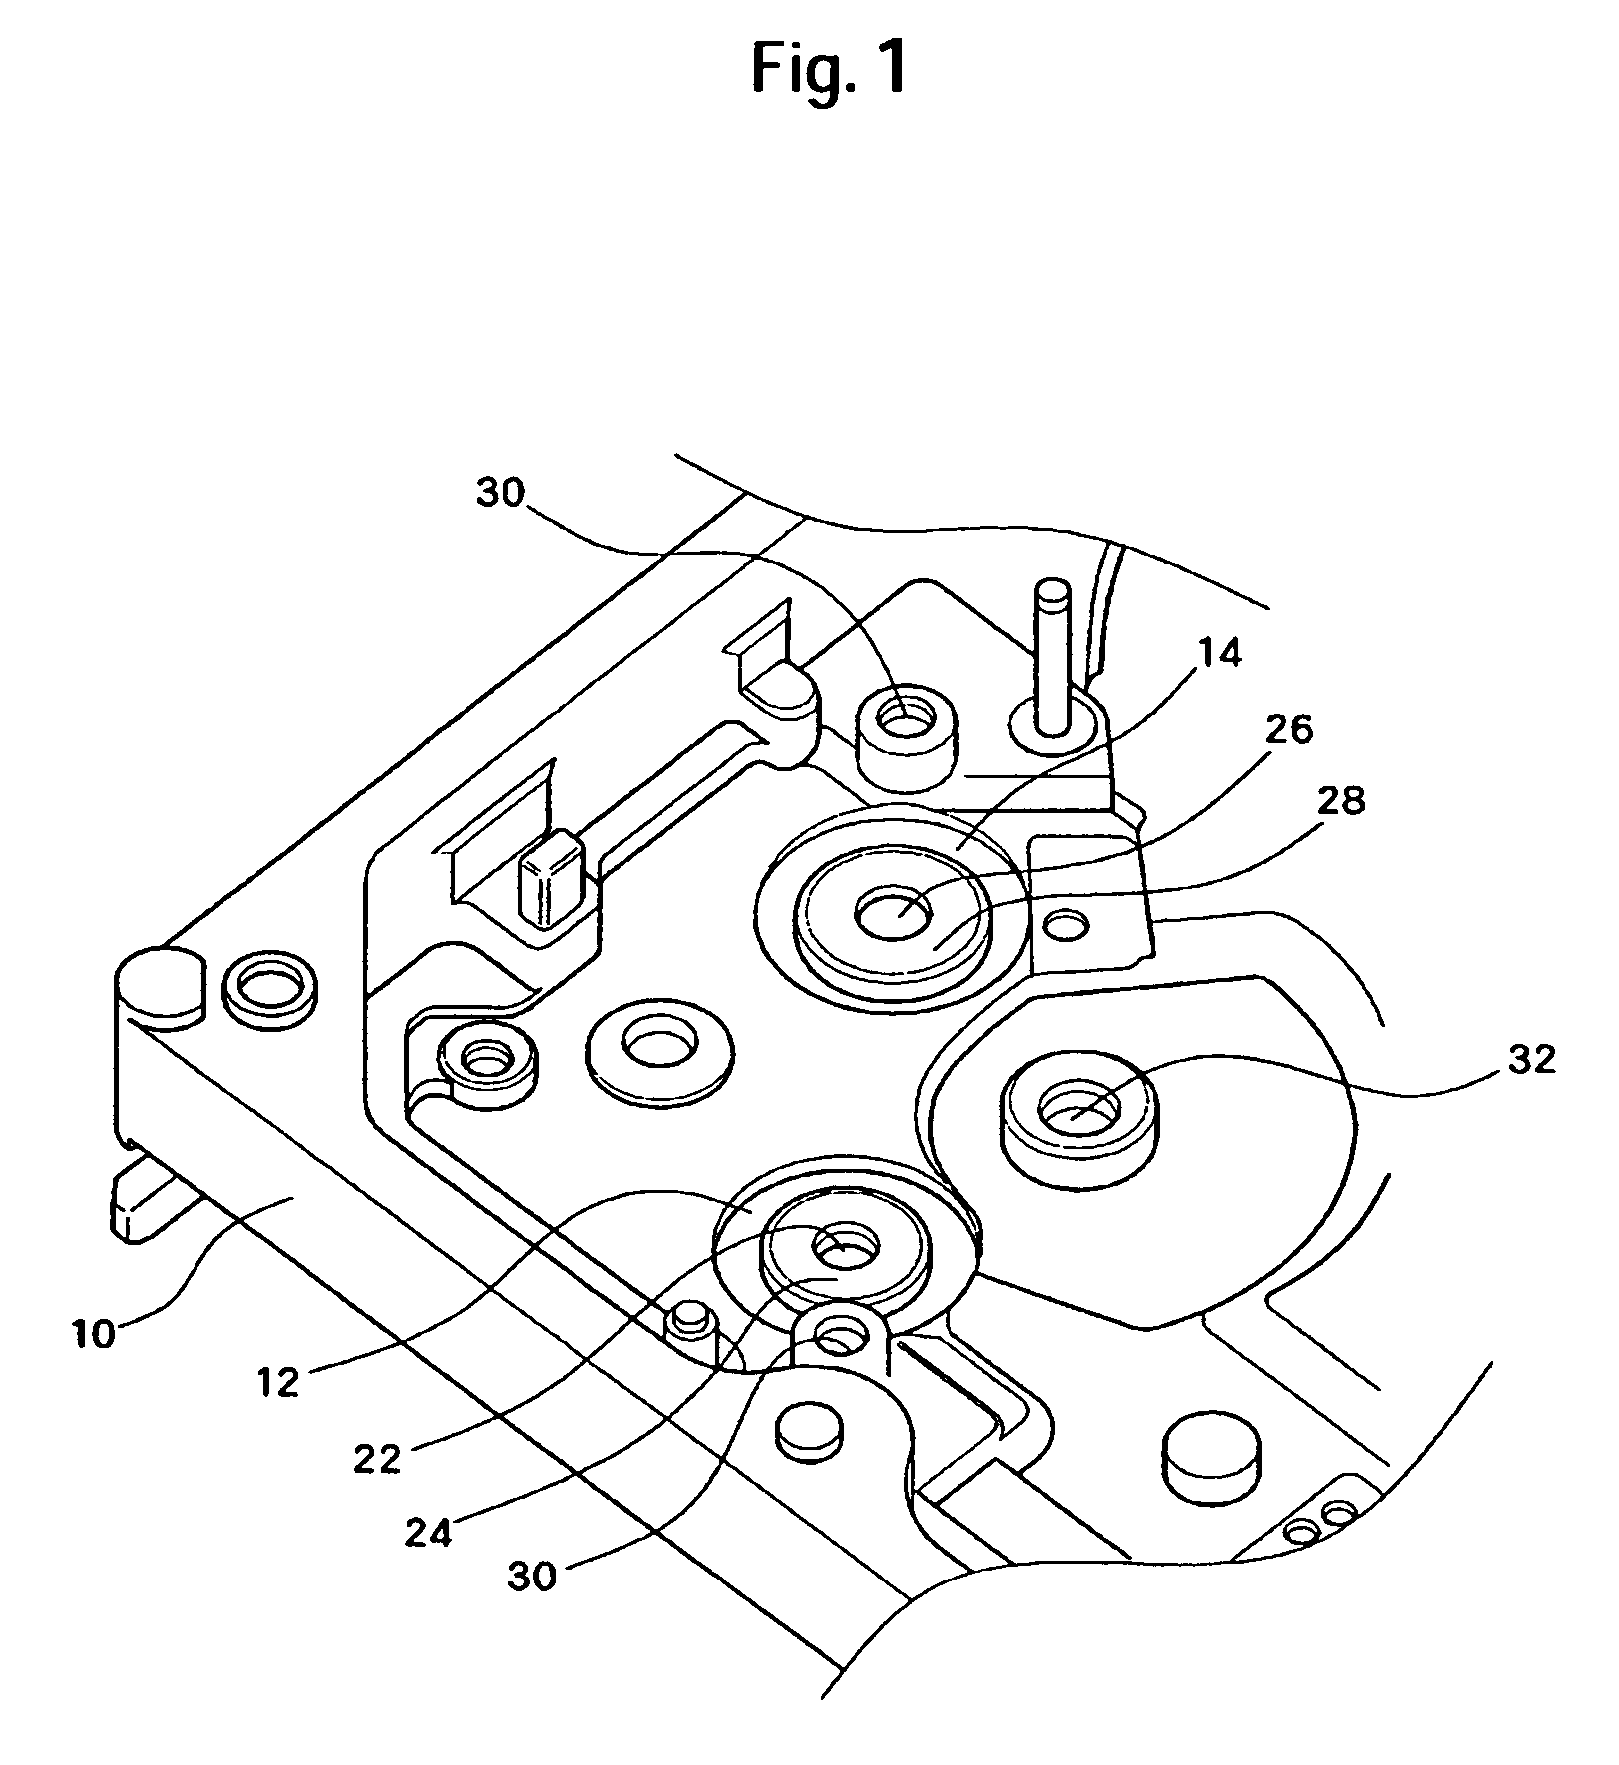 Hard disk drive adapted to prevent release of strain between voice coil motor and base